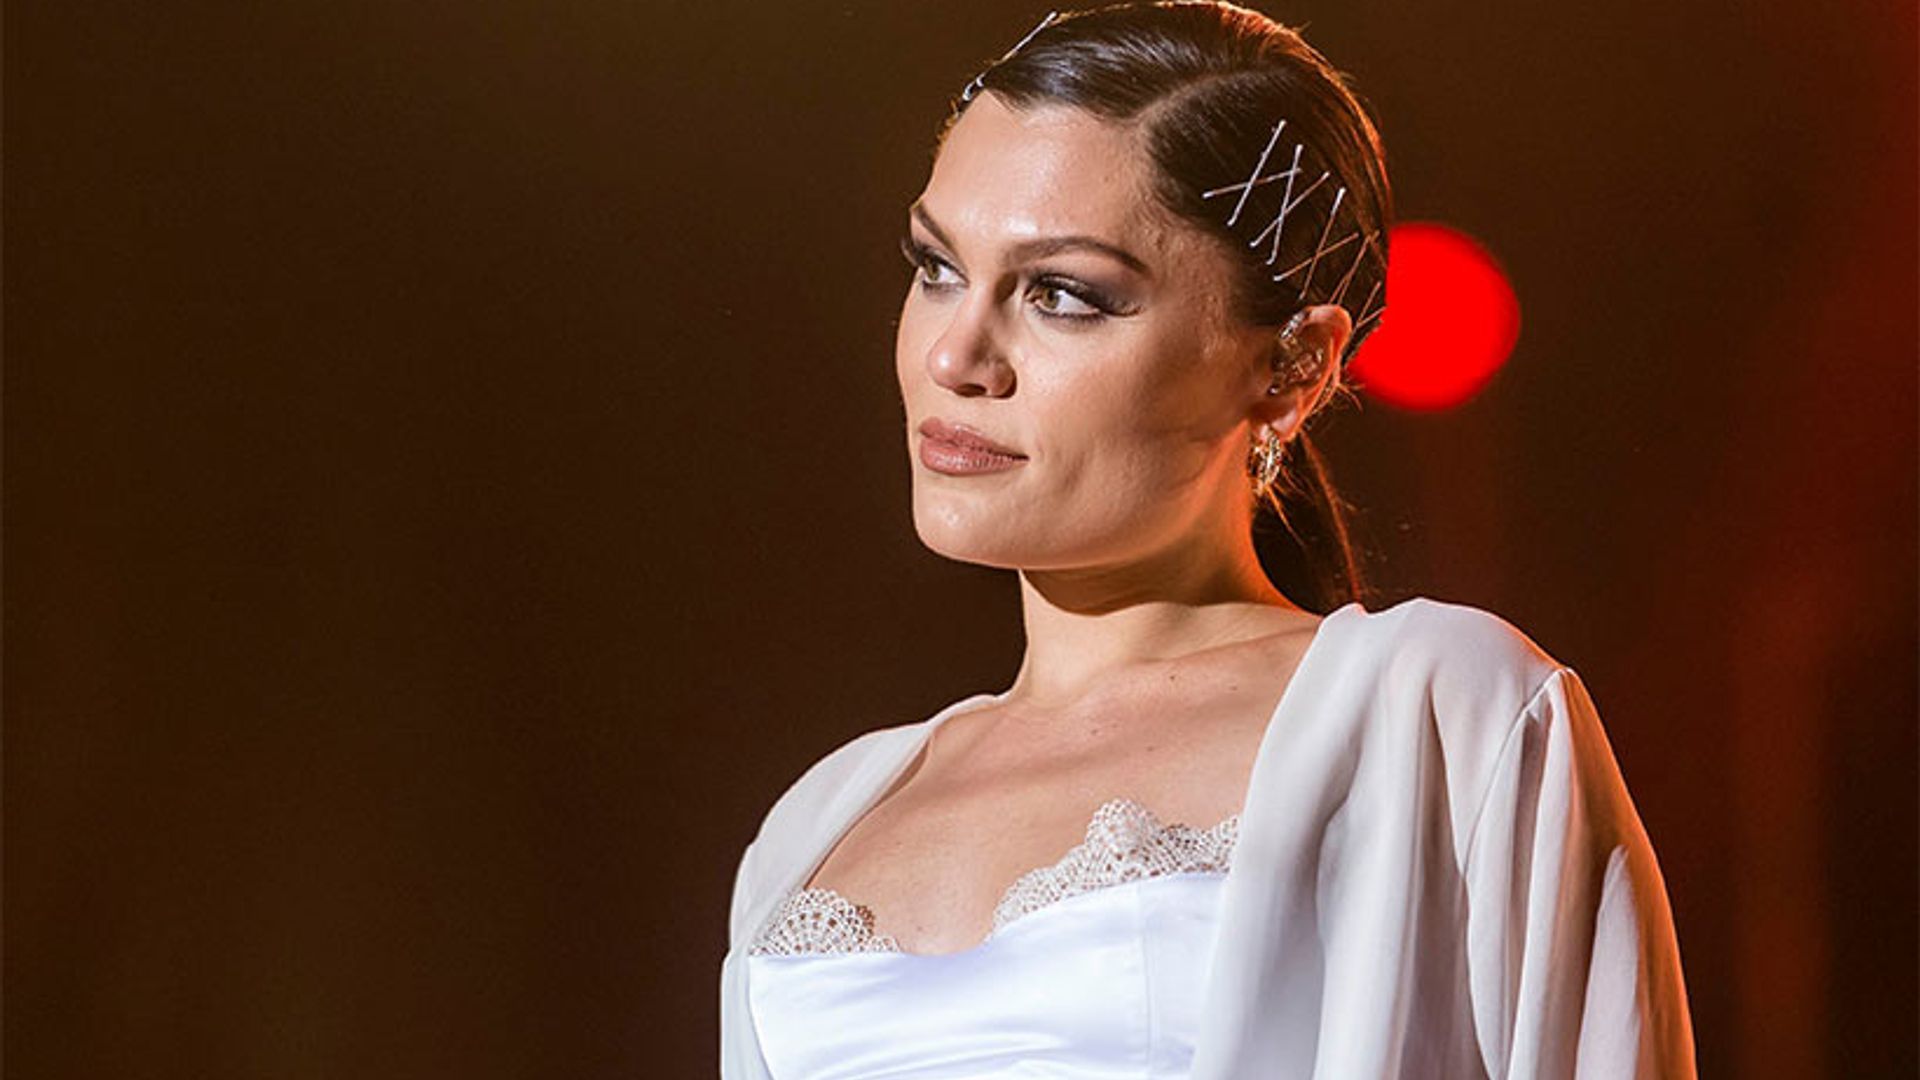 Jessie J shares her 'pain and sadness' over fertility issues – after hinting at secret health battle